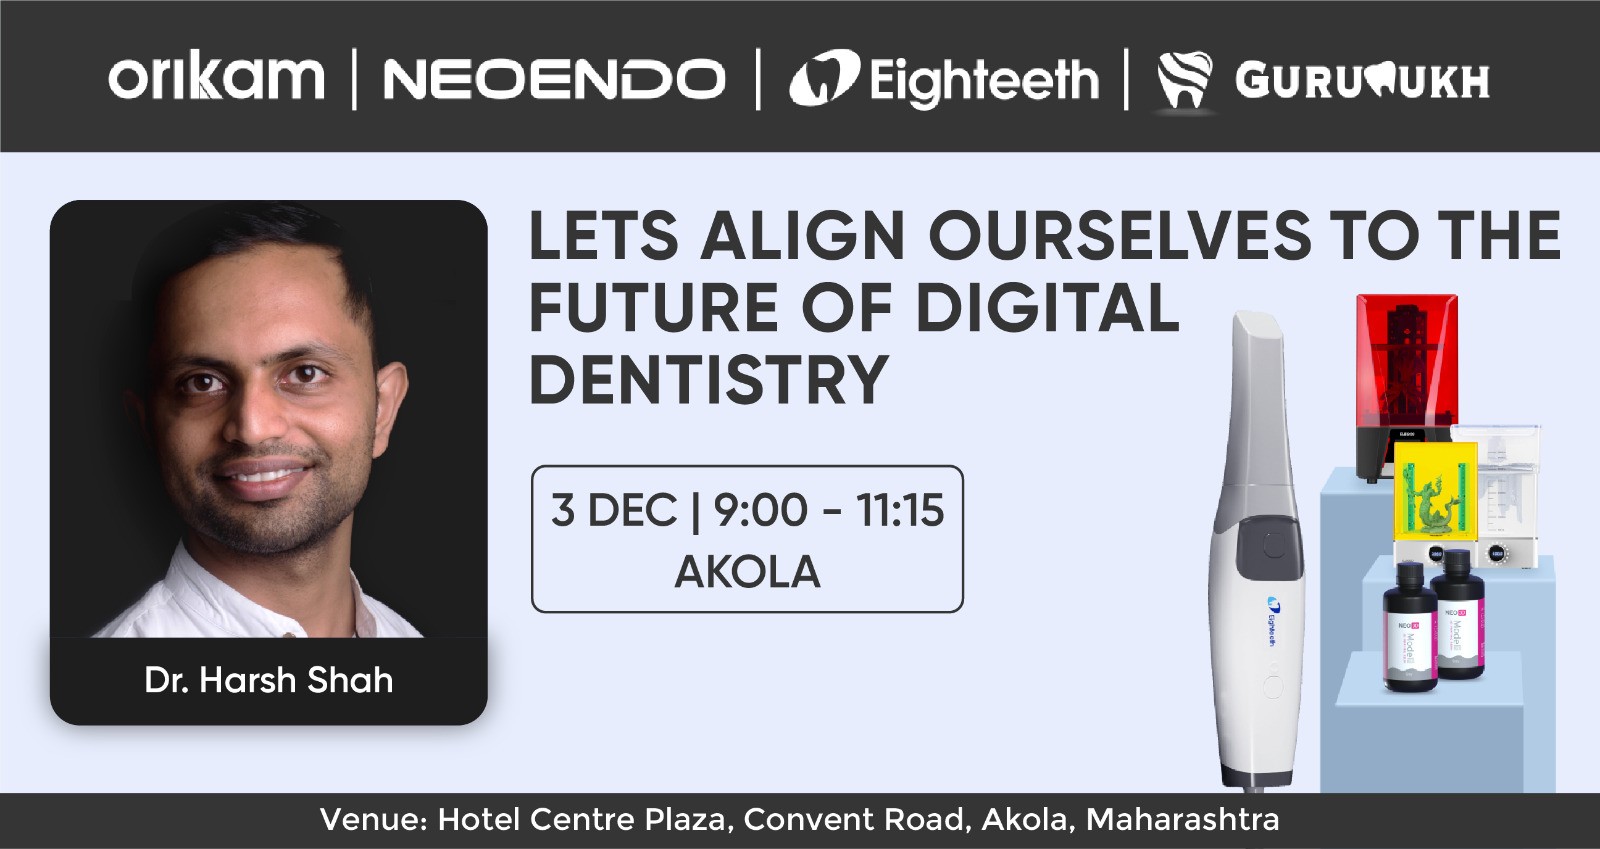 "The Future of Digital Dentistry